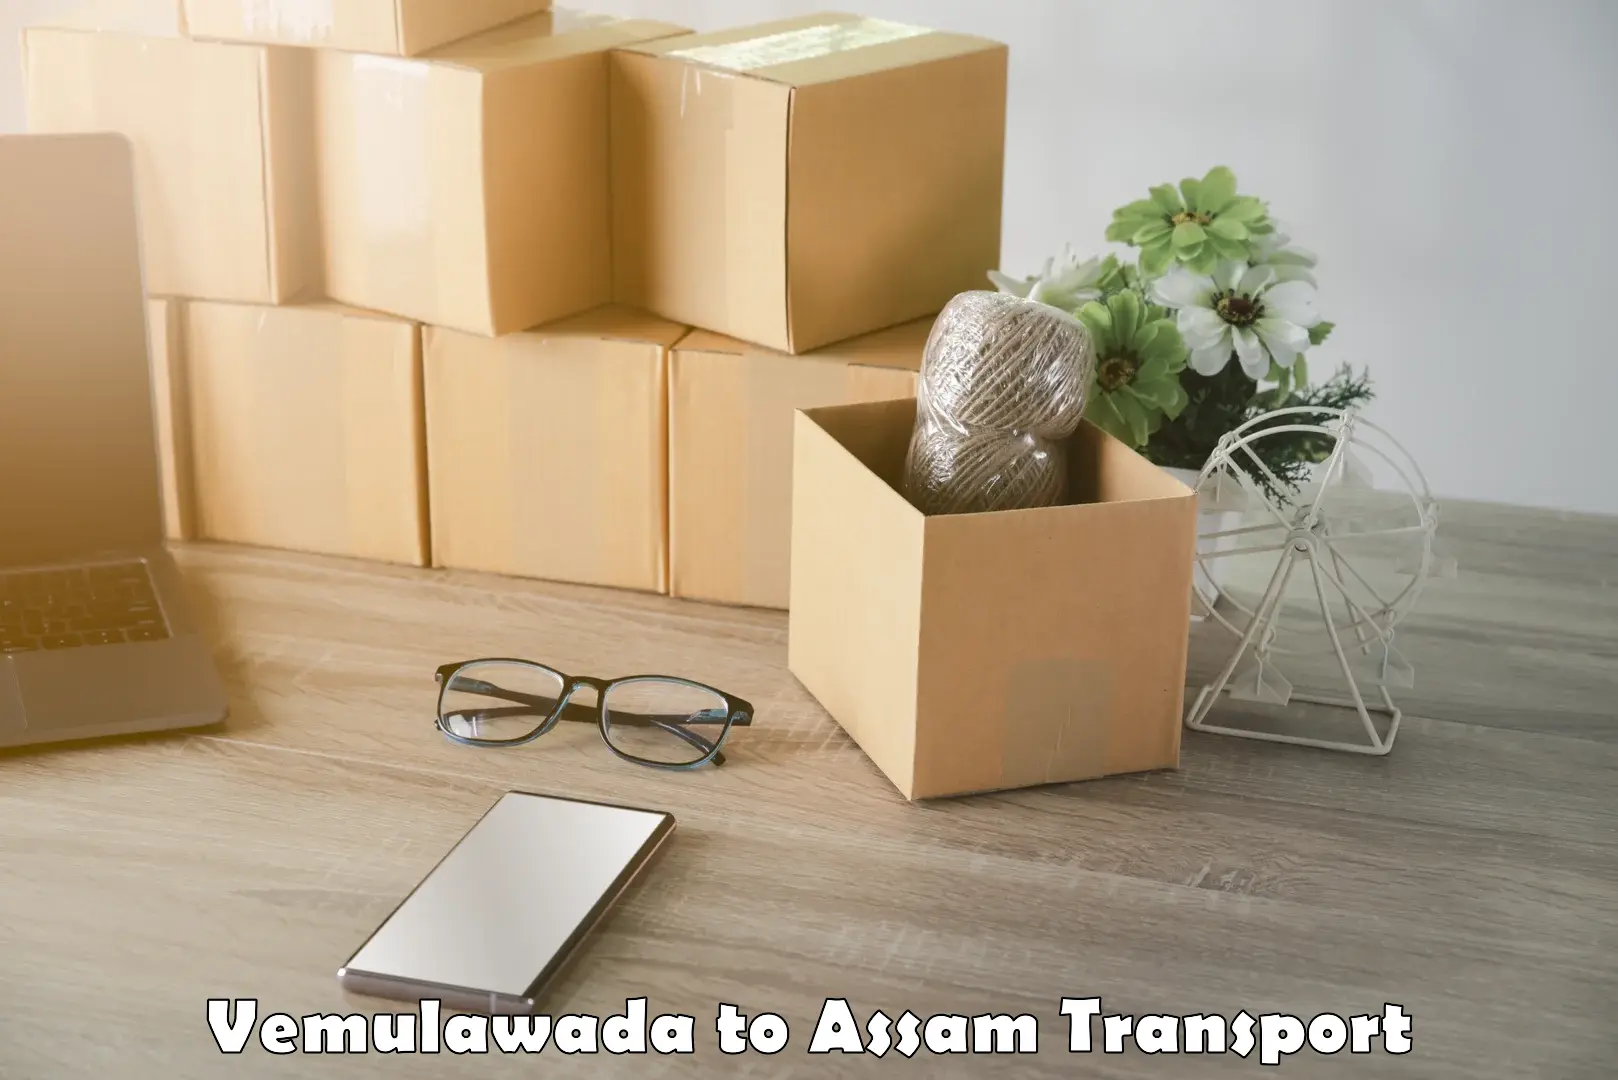 Online transport booking in Vemulawada to Assam